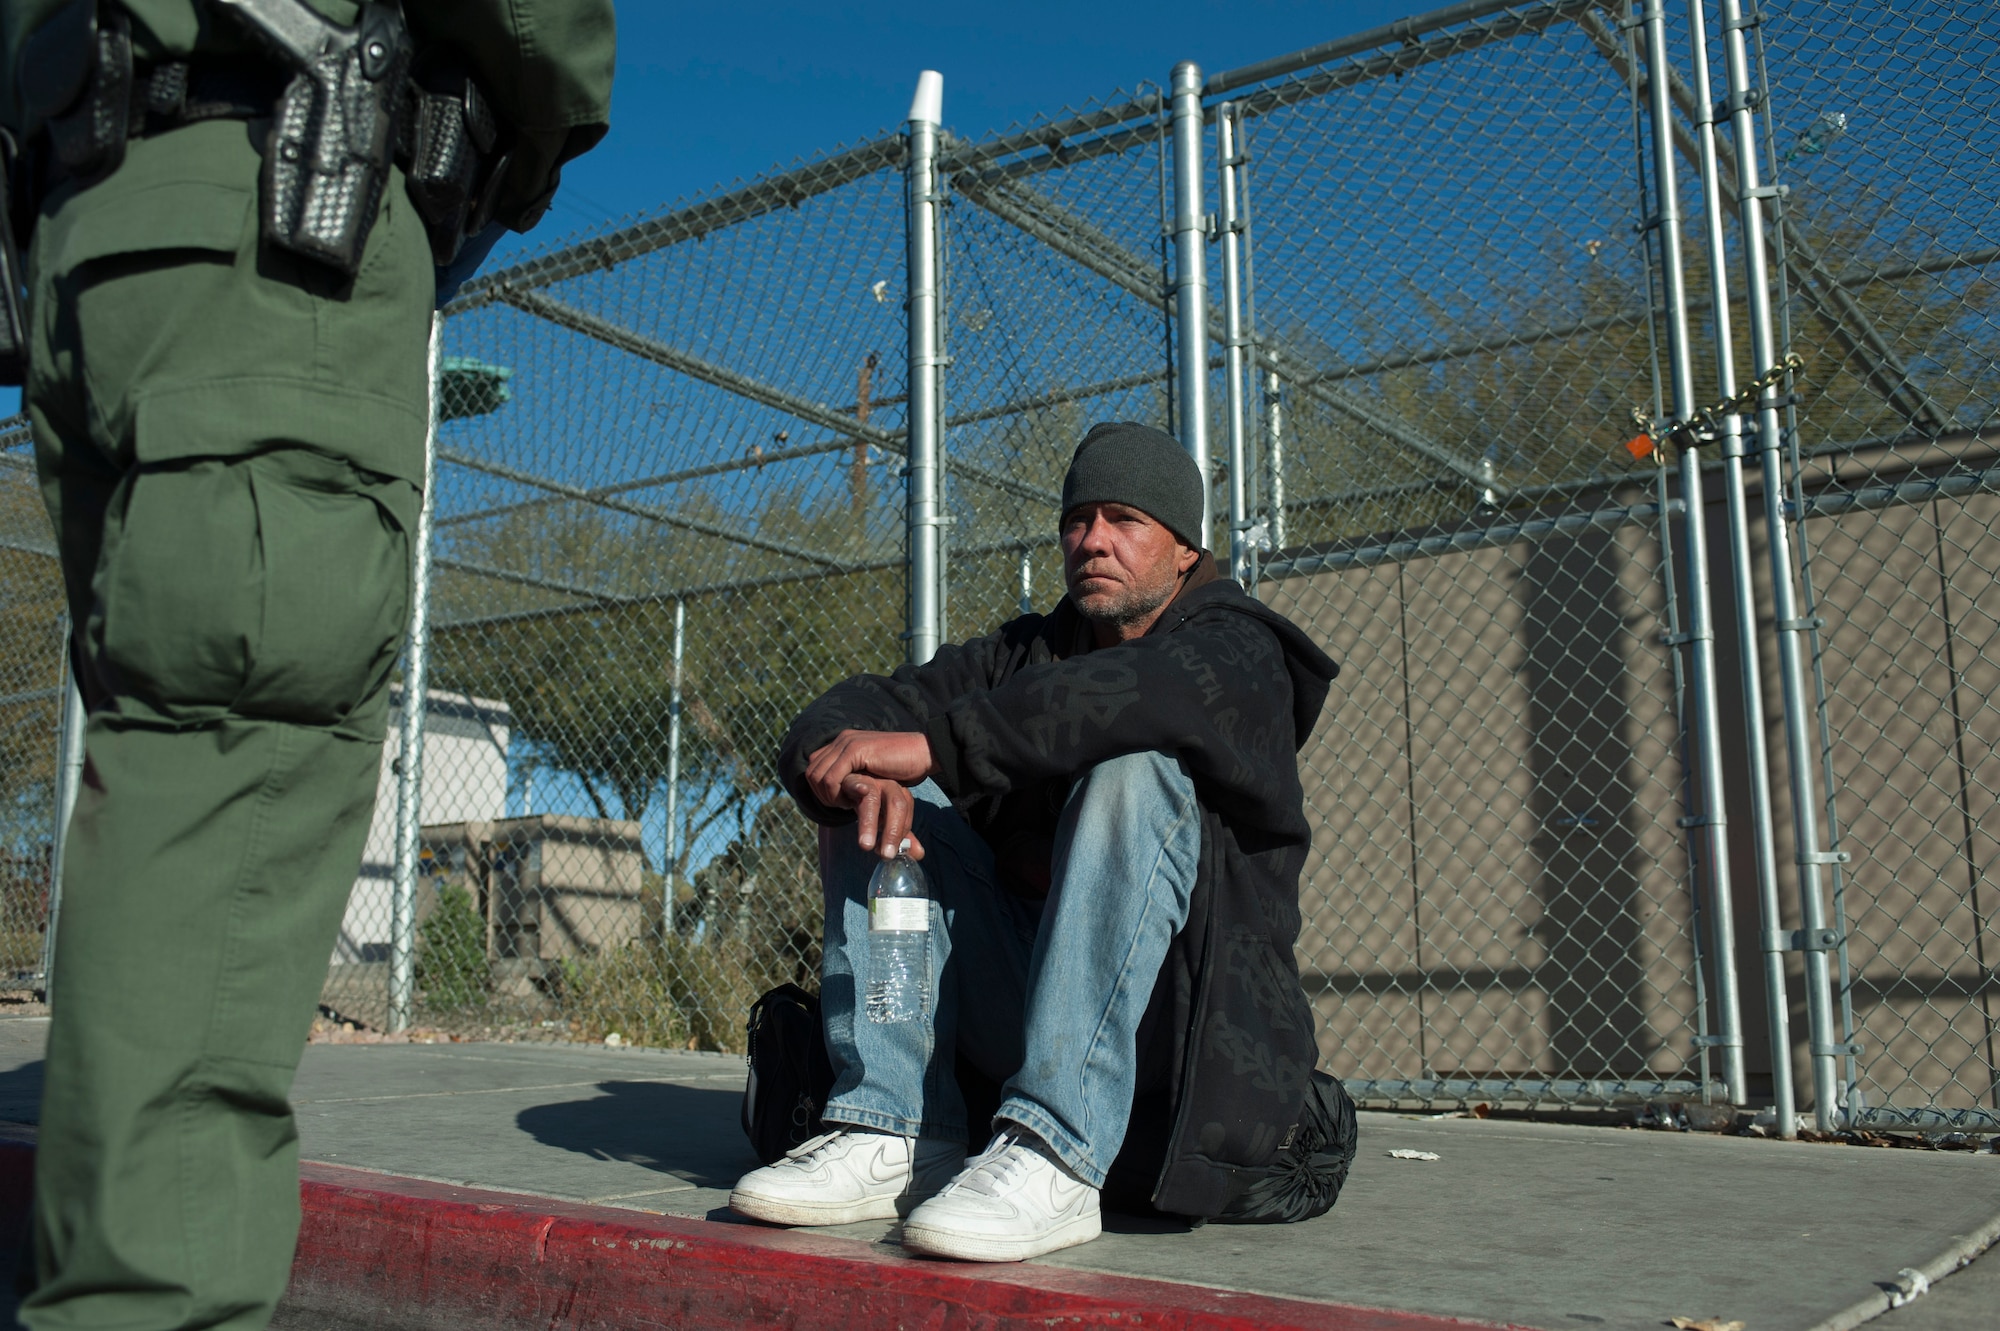 Terry Smith, a homeless man, waits to find out if there is space available in a local detox center while Aden Ocampogomez, Las Vegas Metropolitan Police Department police officer, calls in to request the slot for him Jan. 14, 2014, in Las Vegas. Drug and alcohol abuse are a growing problem amongst the Las Vegas homeless community. (U.S. Air Force photo by Airman 1st Class Timothy Young)